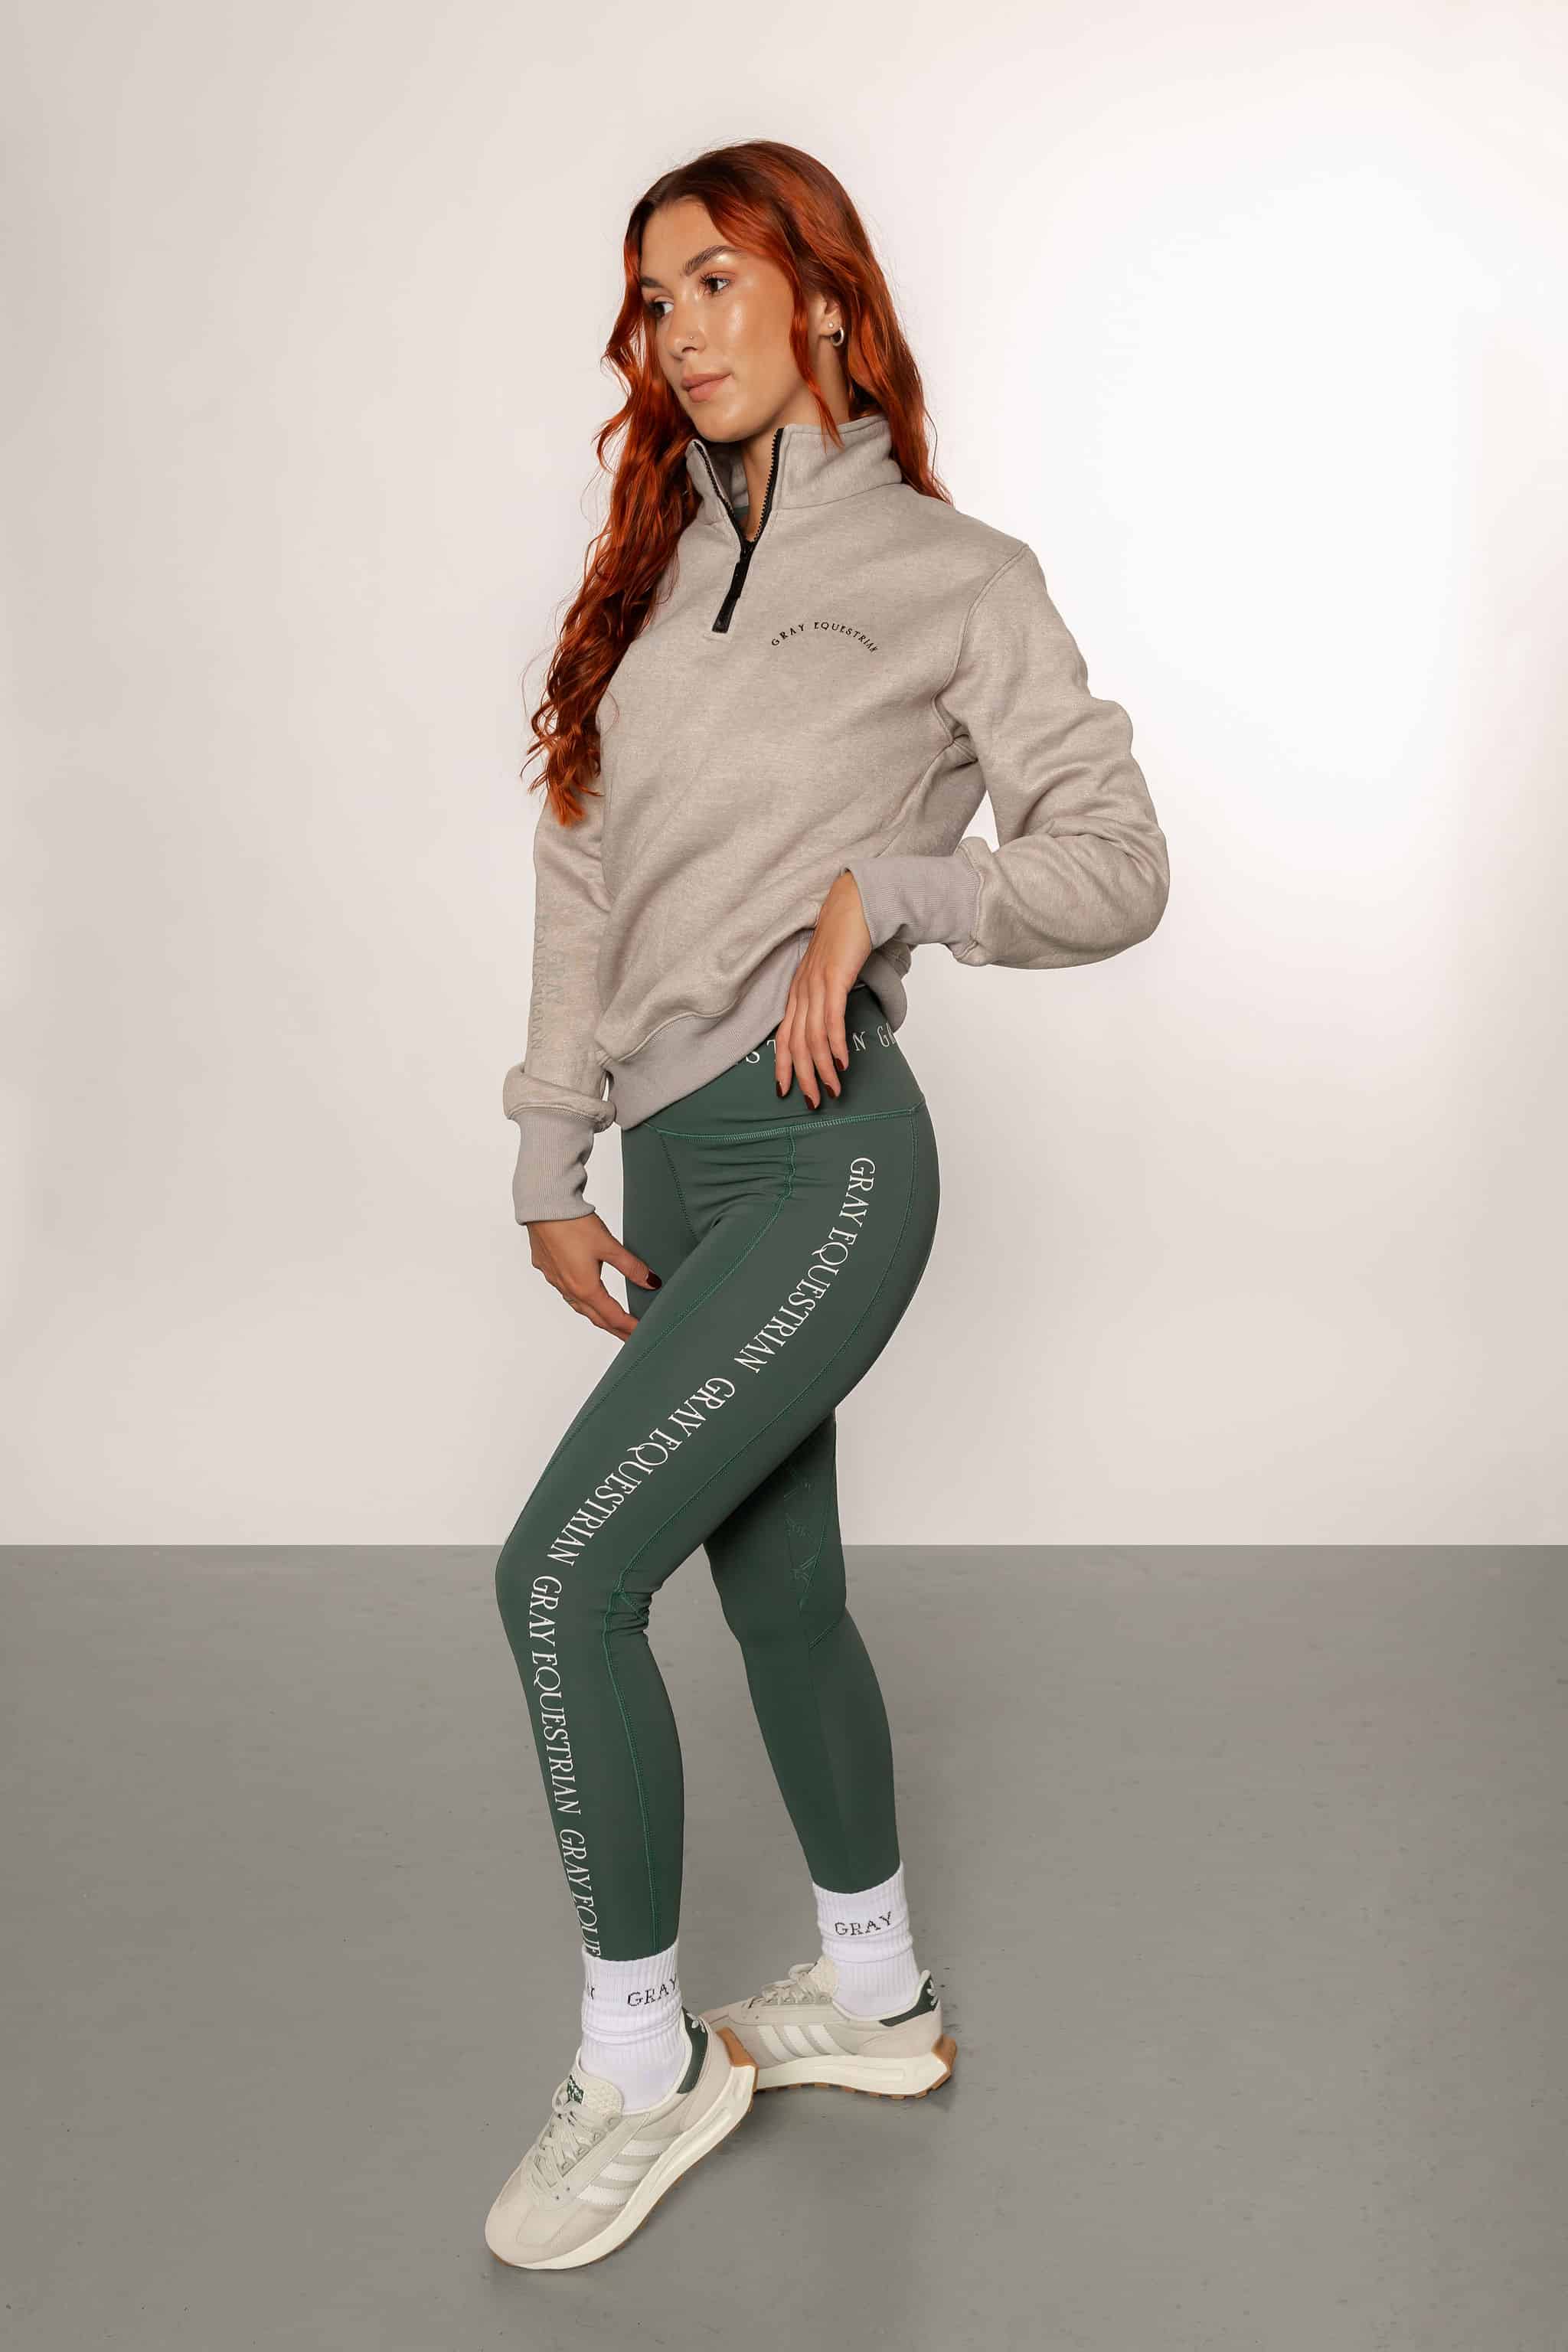 A model wearing our 1/4 zip grey jumper and green riding leggings.